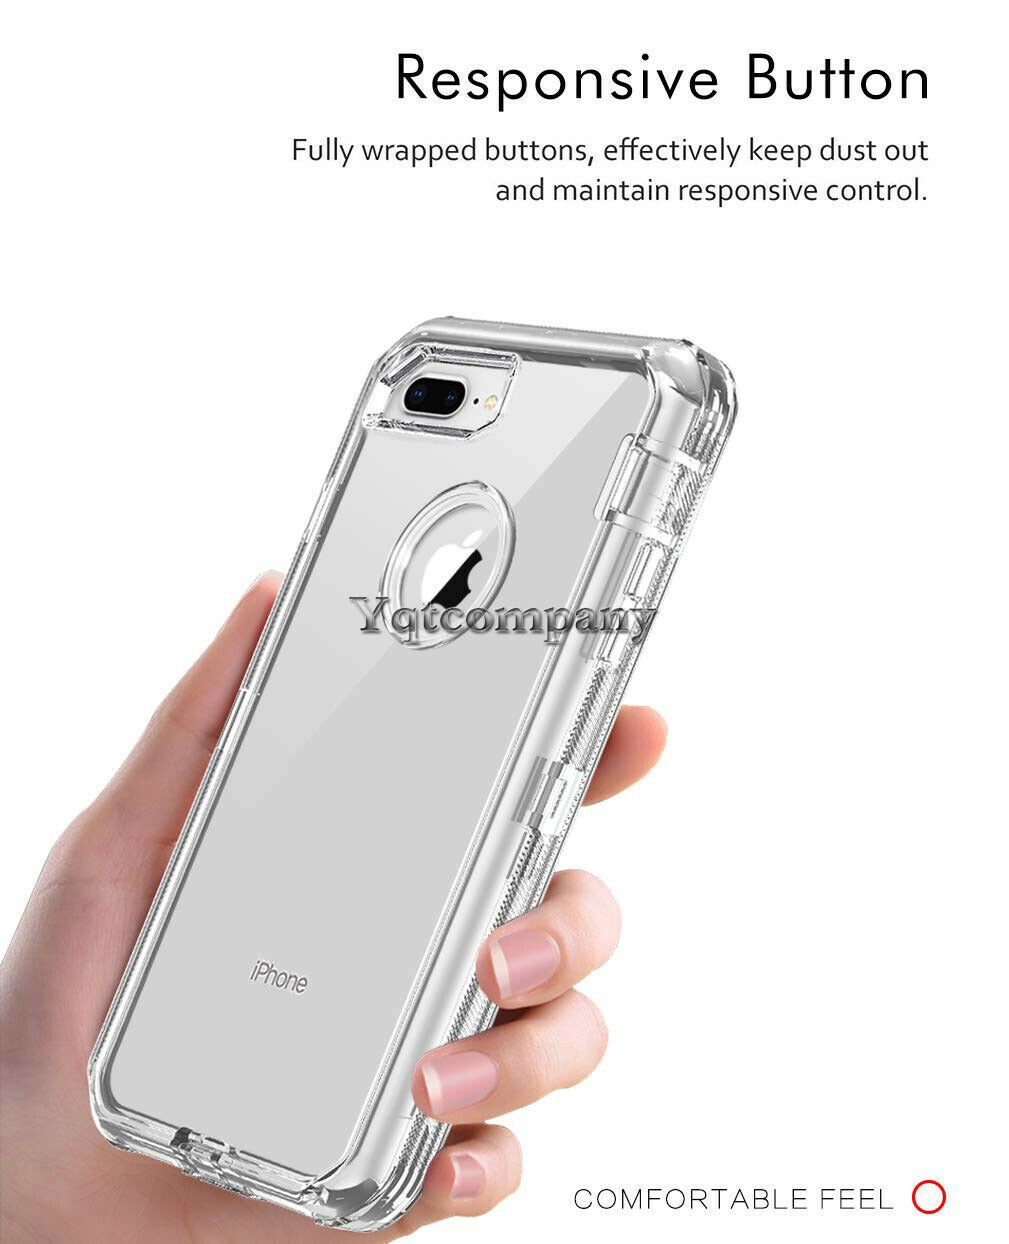 For iPhone 6s 7 8 Plus 11 Pro Max XR XS Max SE ULTRA SHOCKPROOF Armor Cover Case yqtcompany 